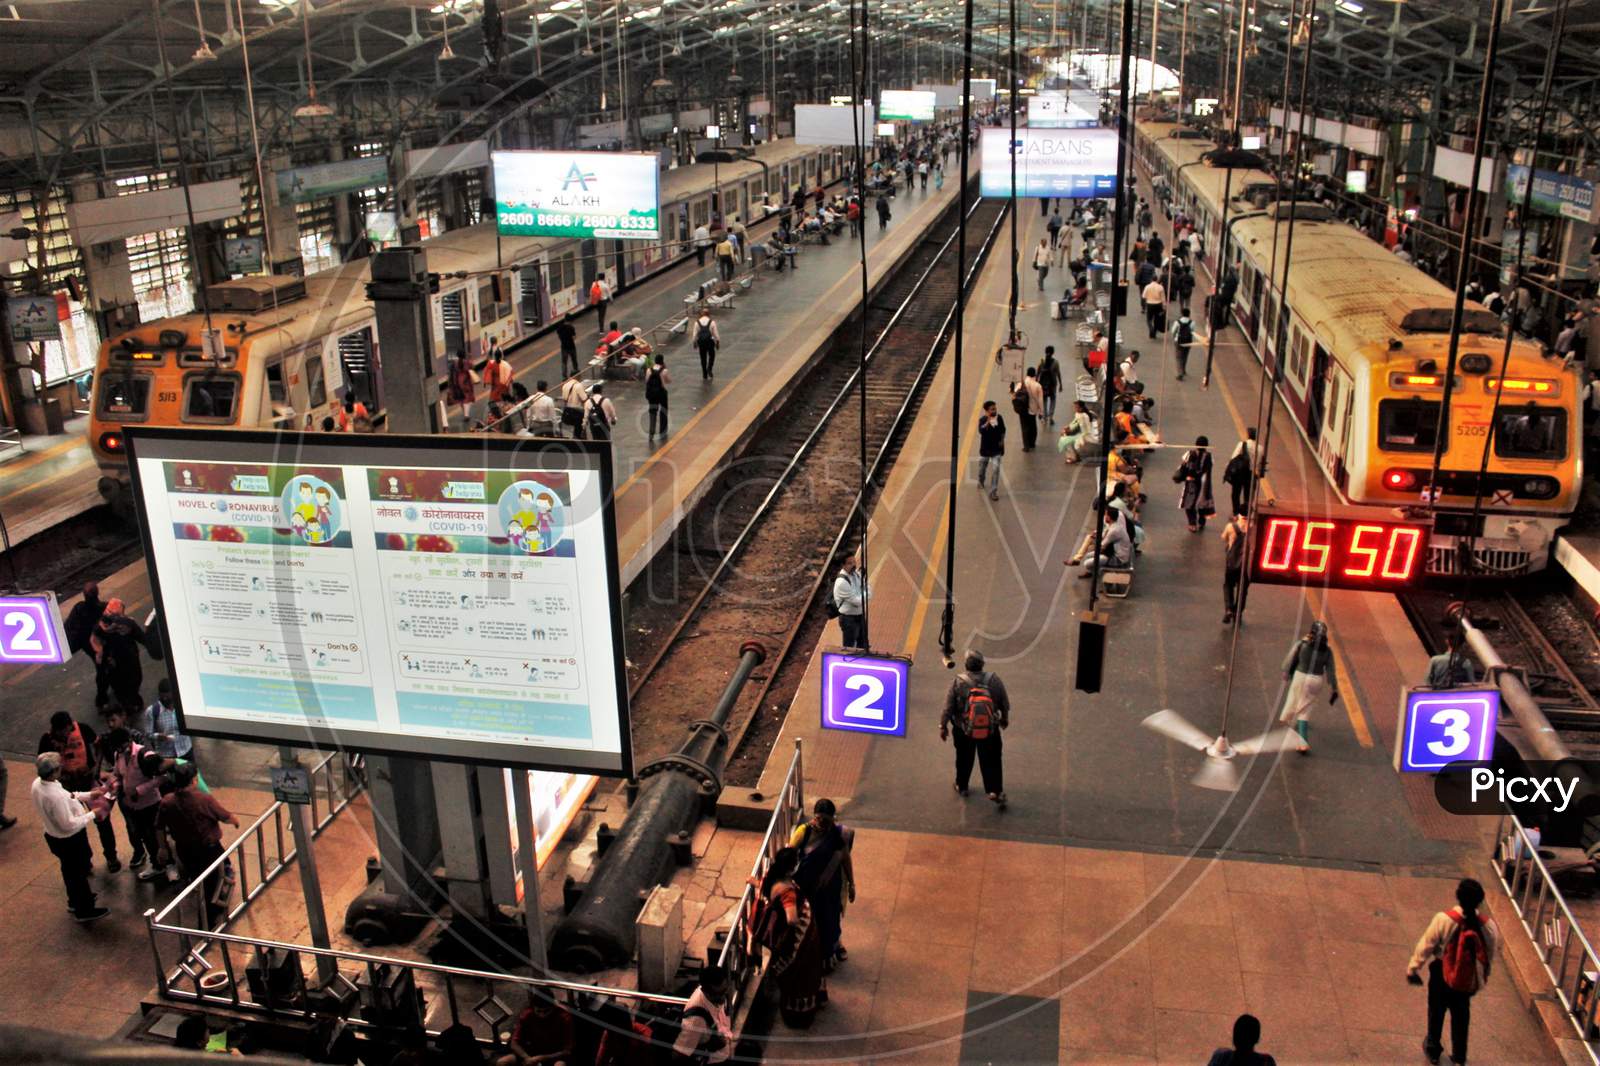 A screen displaying preventive measures to combat COVID-19 and the thinning of crowd at the usually packed Churchgate station is seen amid the spread of Coronavirus in Mumbai, India on 18th March 2020.